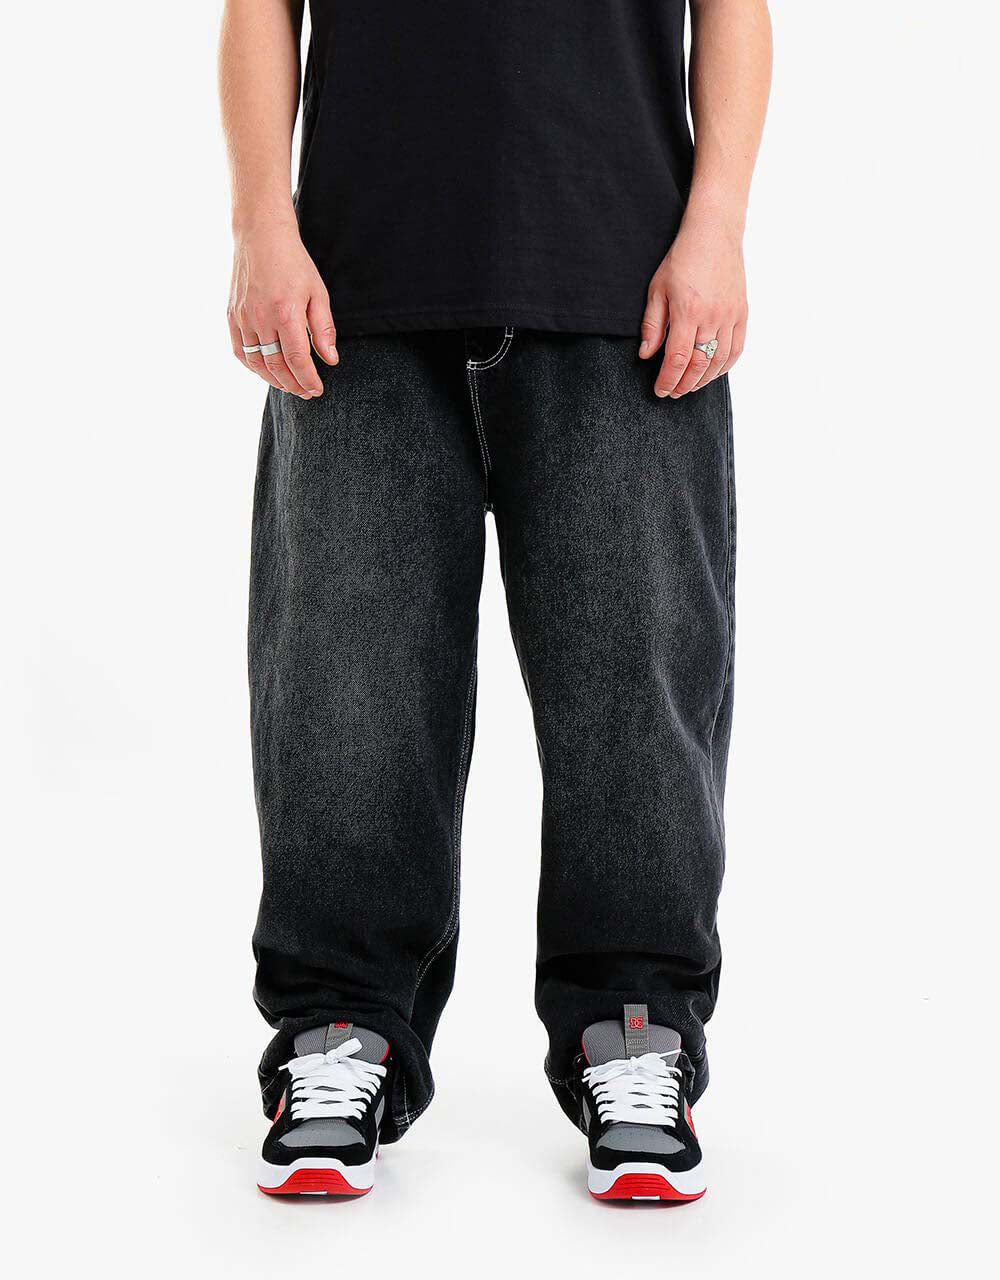 Route One Super Baggy XL Denim Jeans- Washed Black